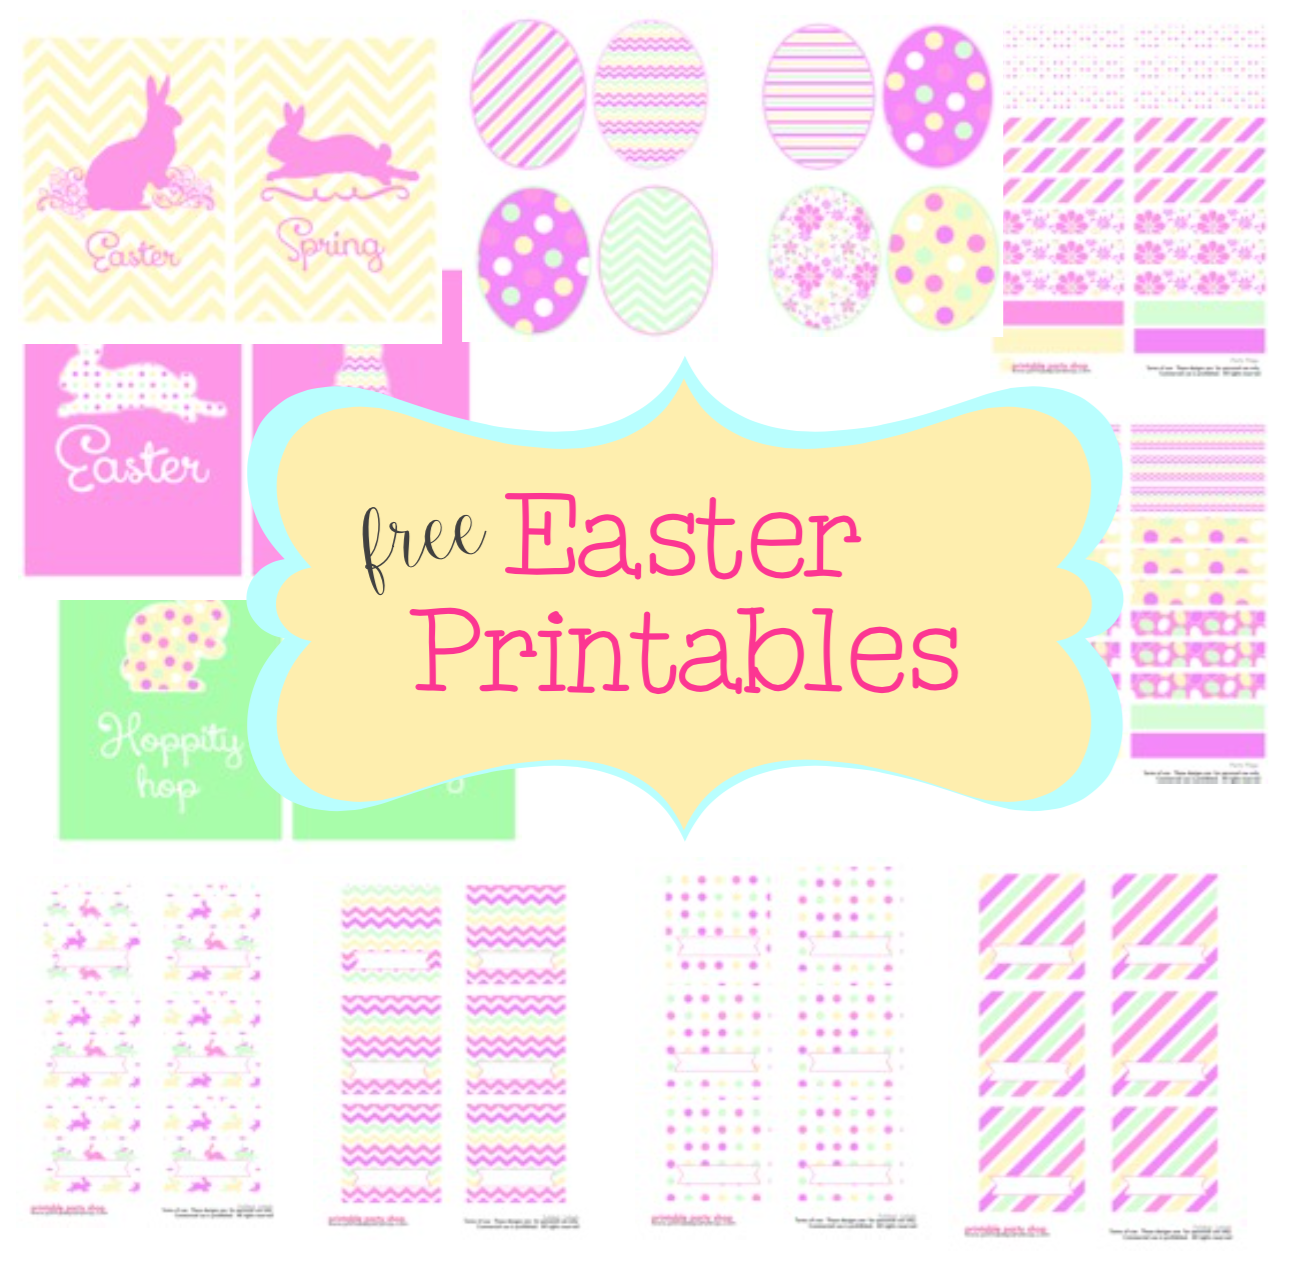 Free Easter Printables Set- Frosted Events www.frostedevents.com